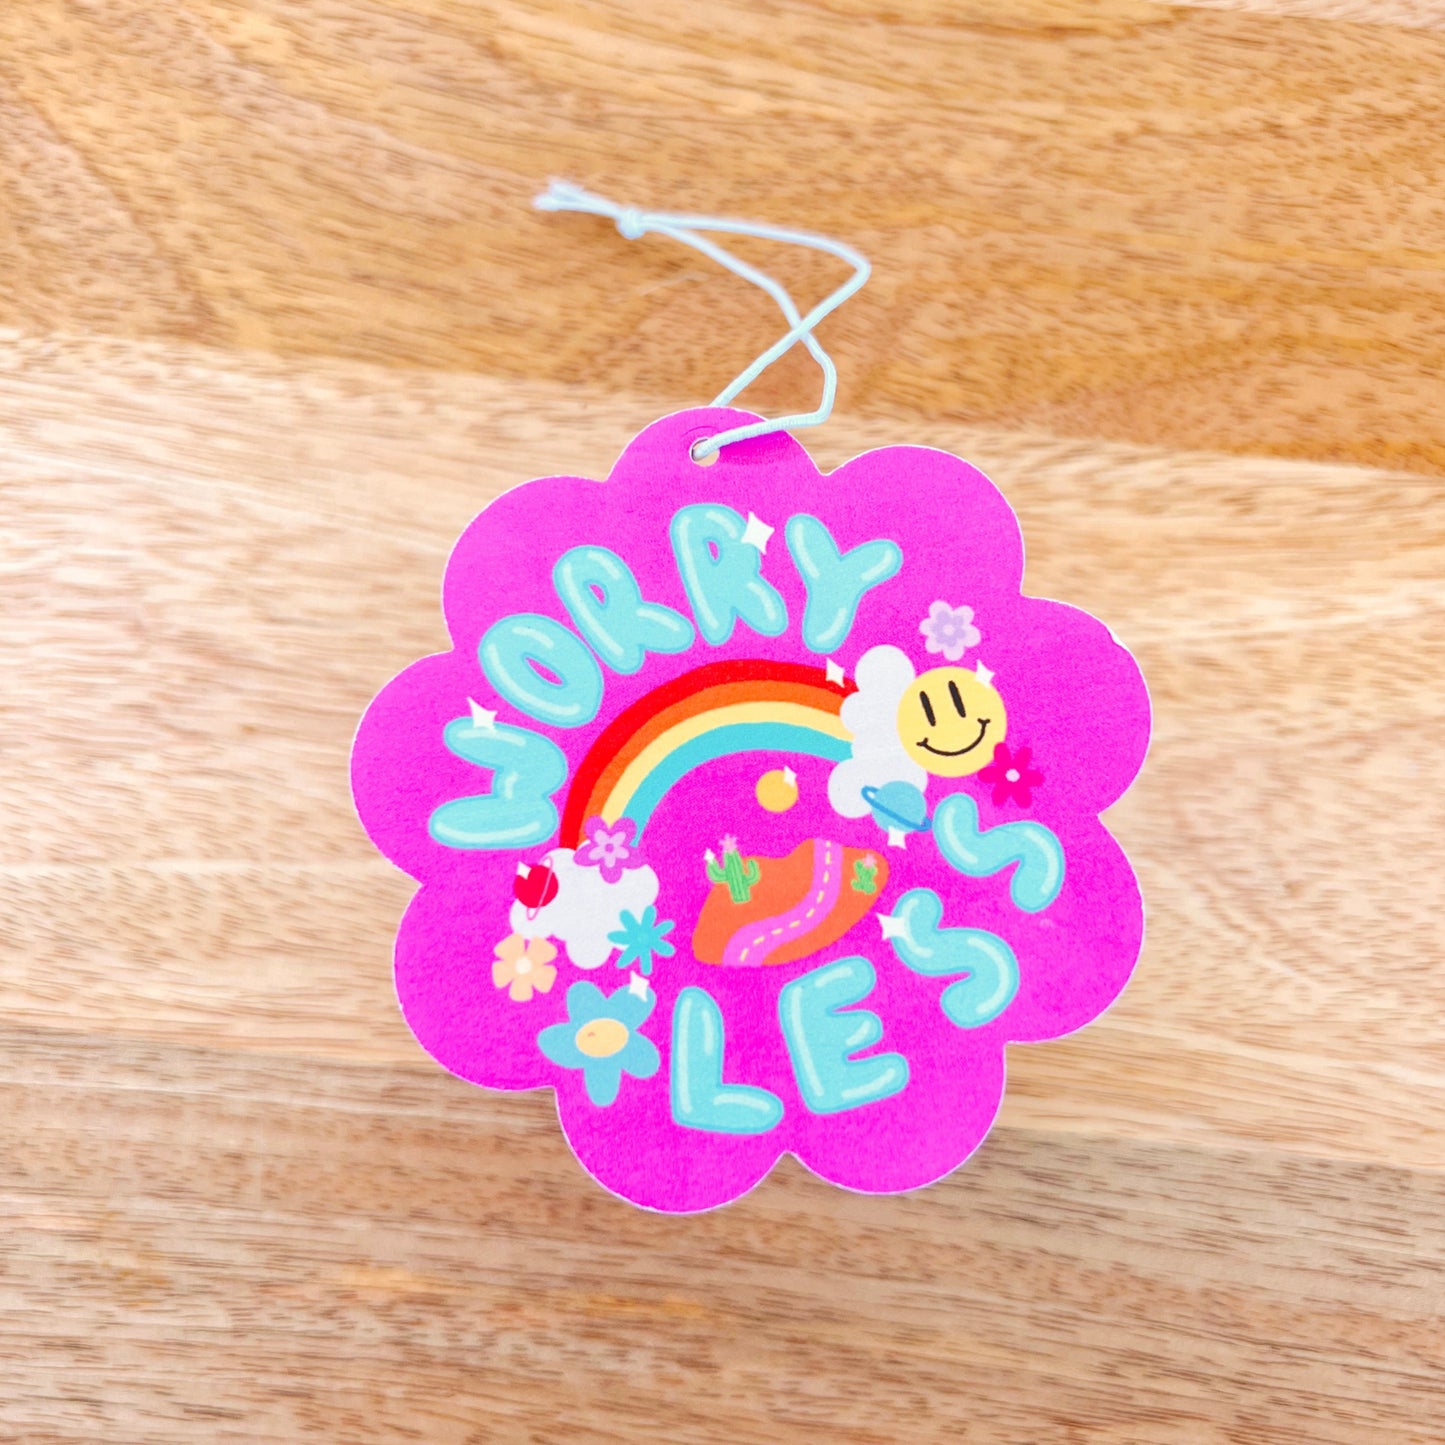 Car Air Freshener - Worryless Doodle - Cotton Candy